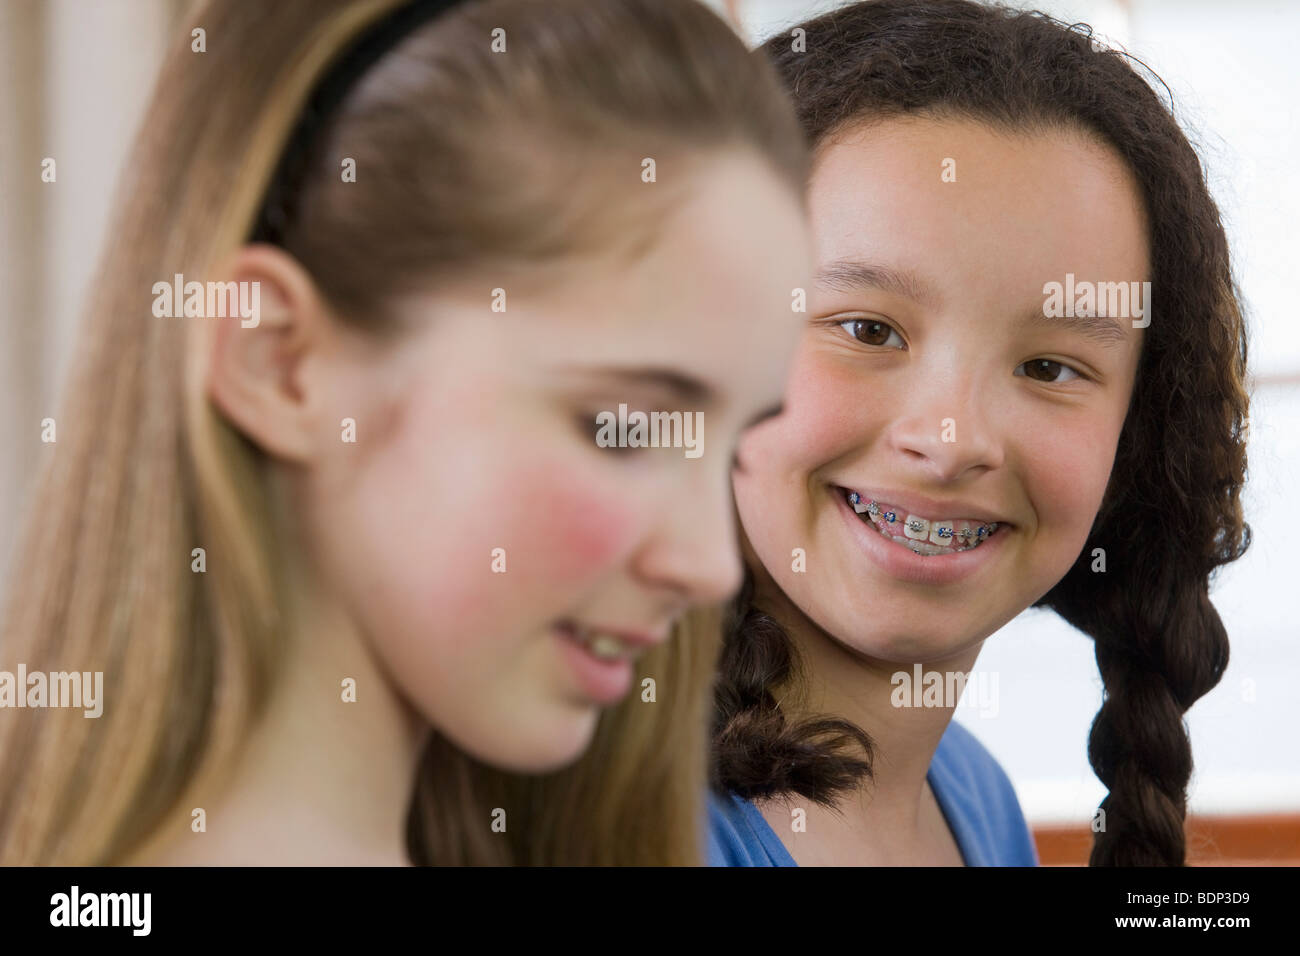 Close-up of two girls smiling Stock Photo